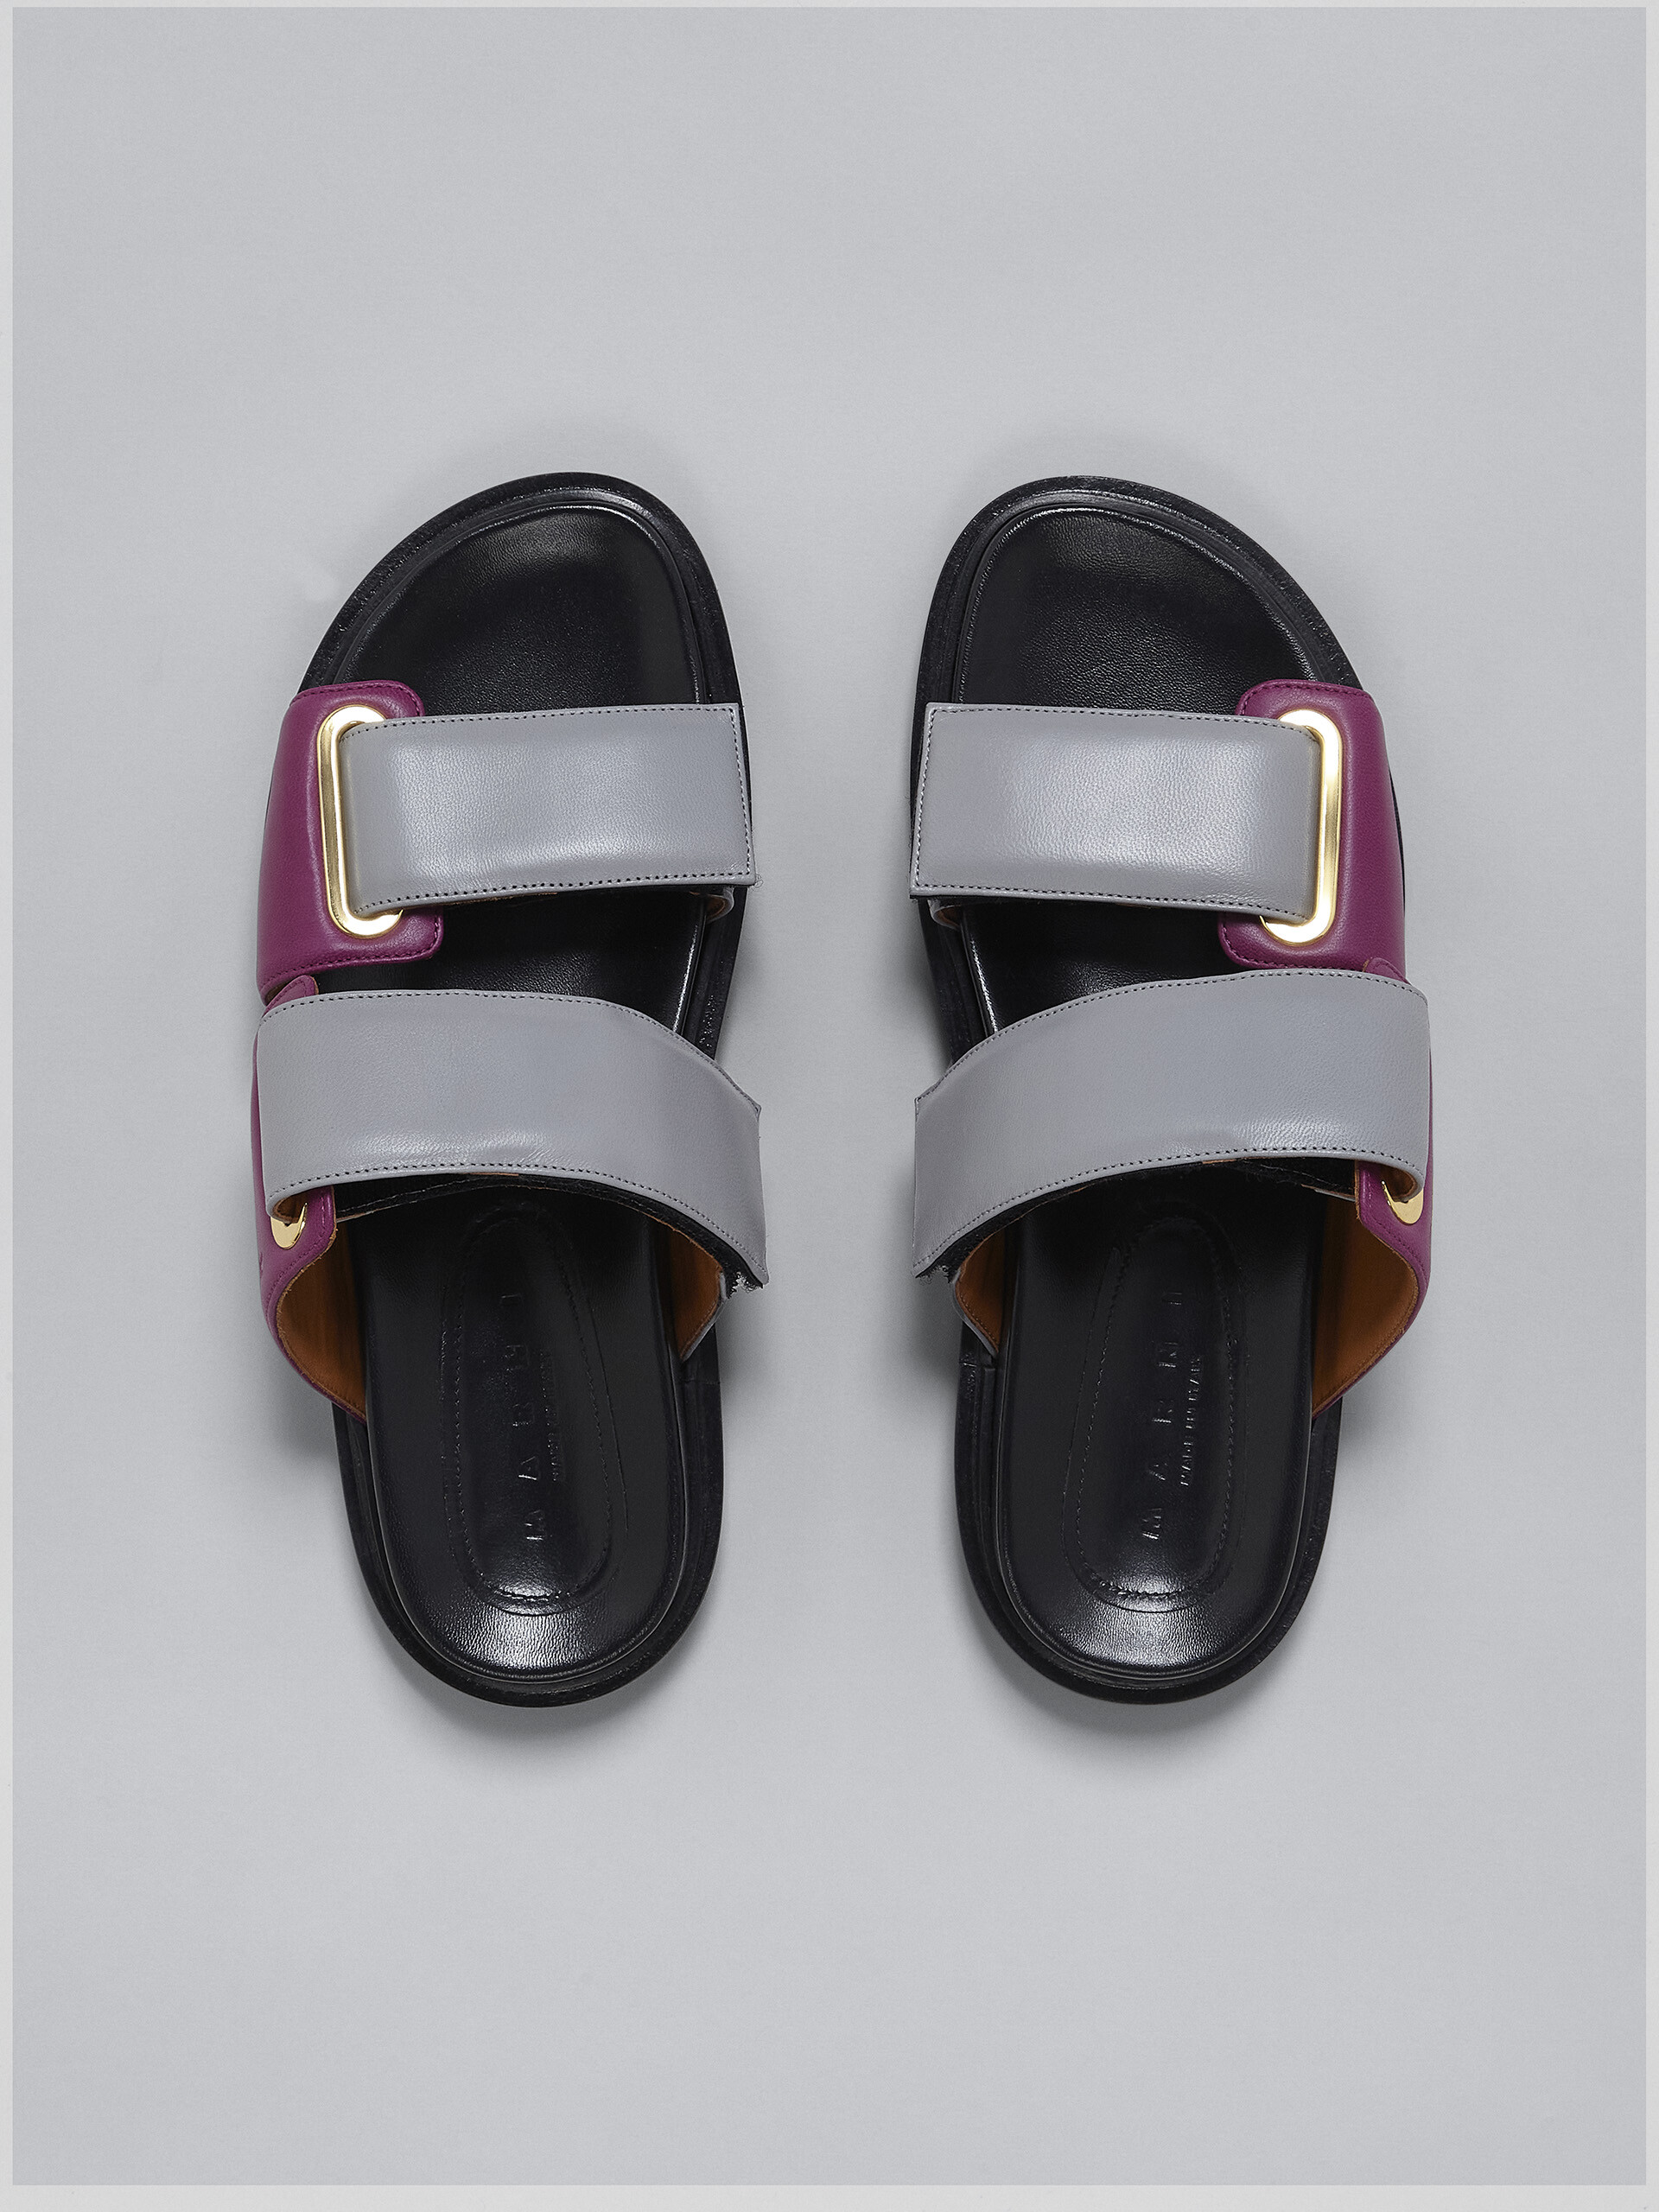 Grey and fucshia leather fussbett - Sandals - Image 4